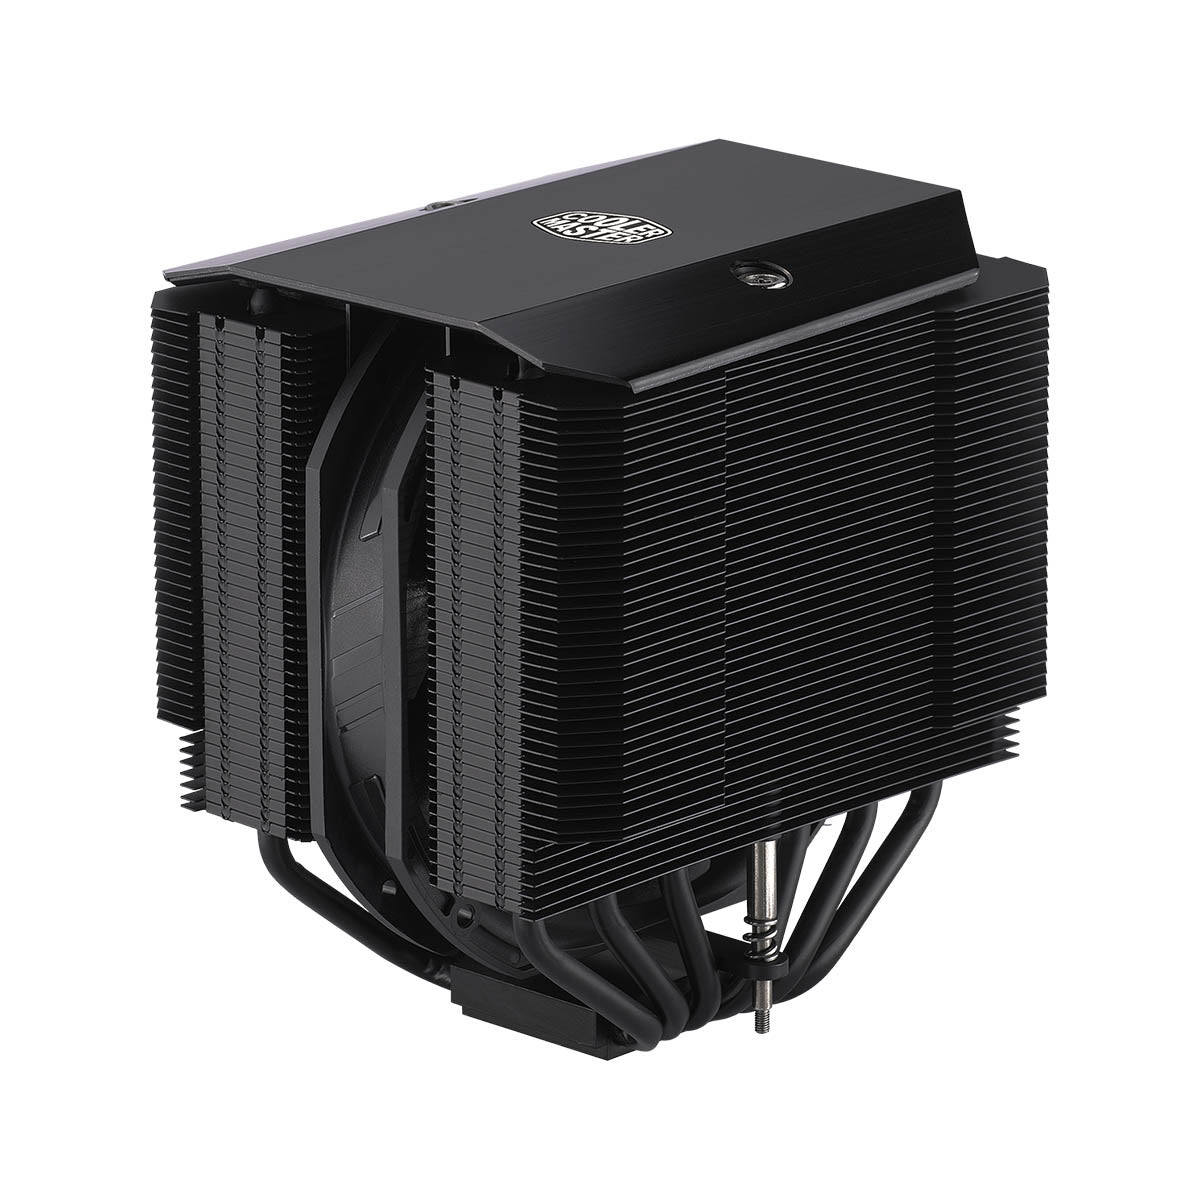 Cooler Master MasterAir MA624 Stealth CPU Air Cooler with Dual 140mm SickleFlow Fan and One 120mm Fan